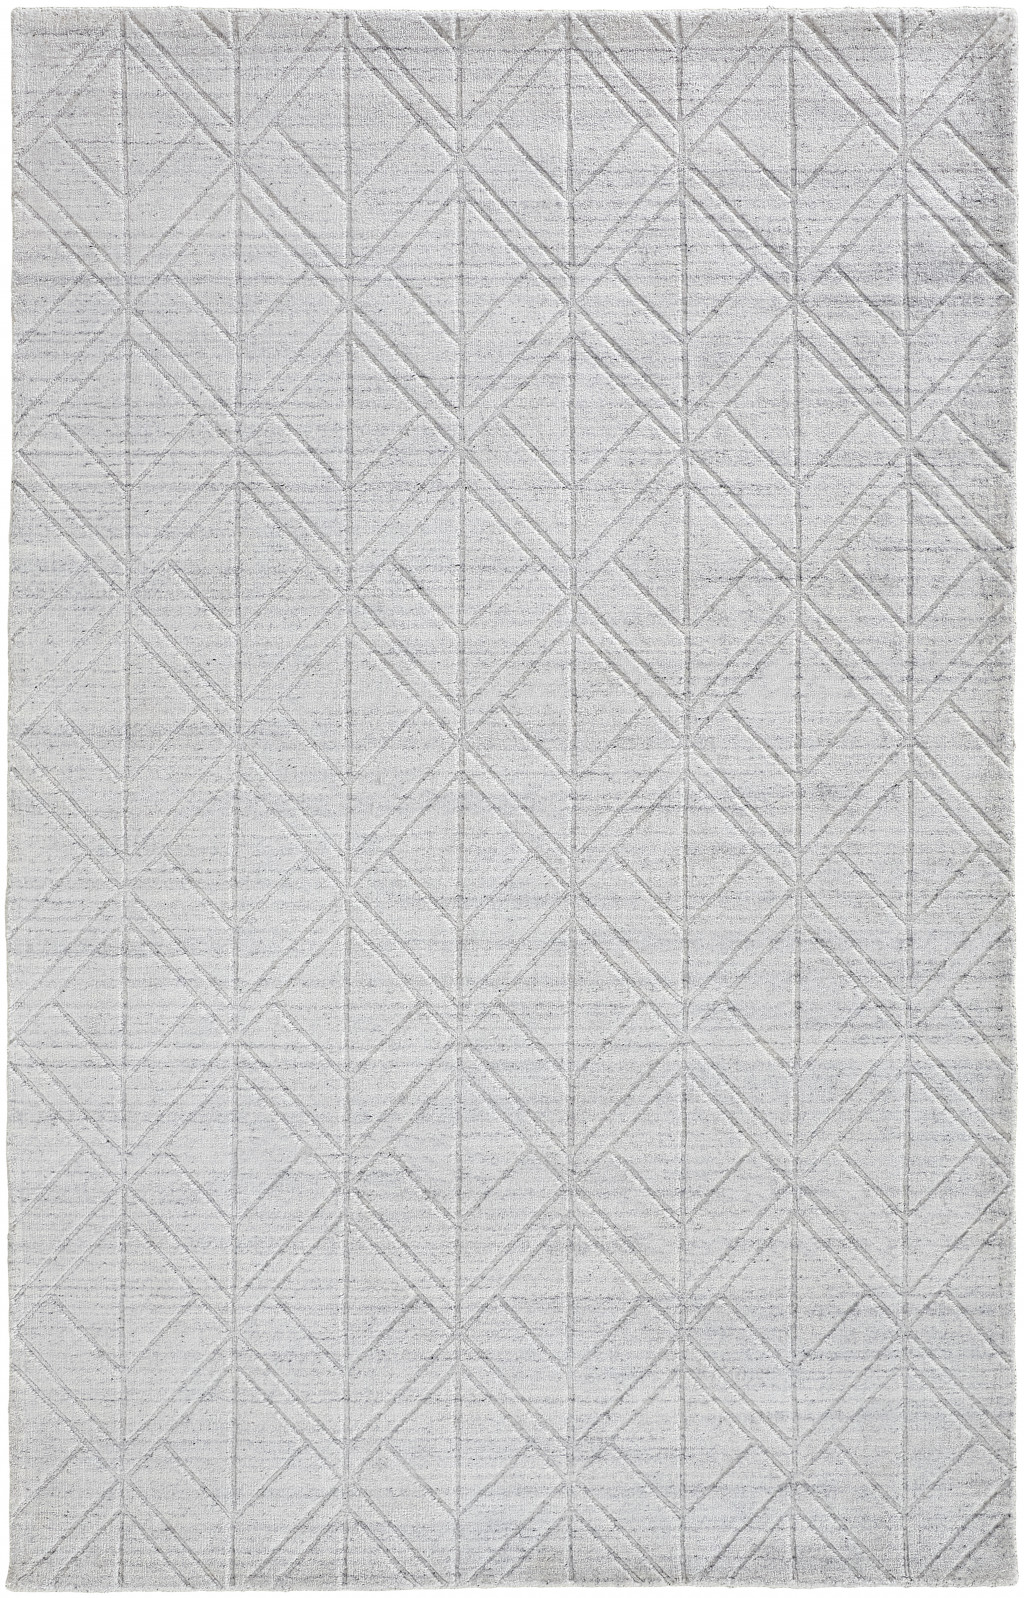 9' X 12' White And Silver Striped Hand Woven Area Rug-514780-1